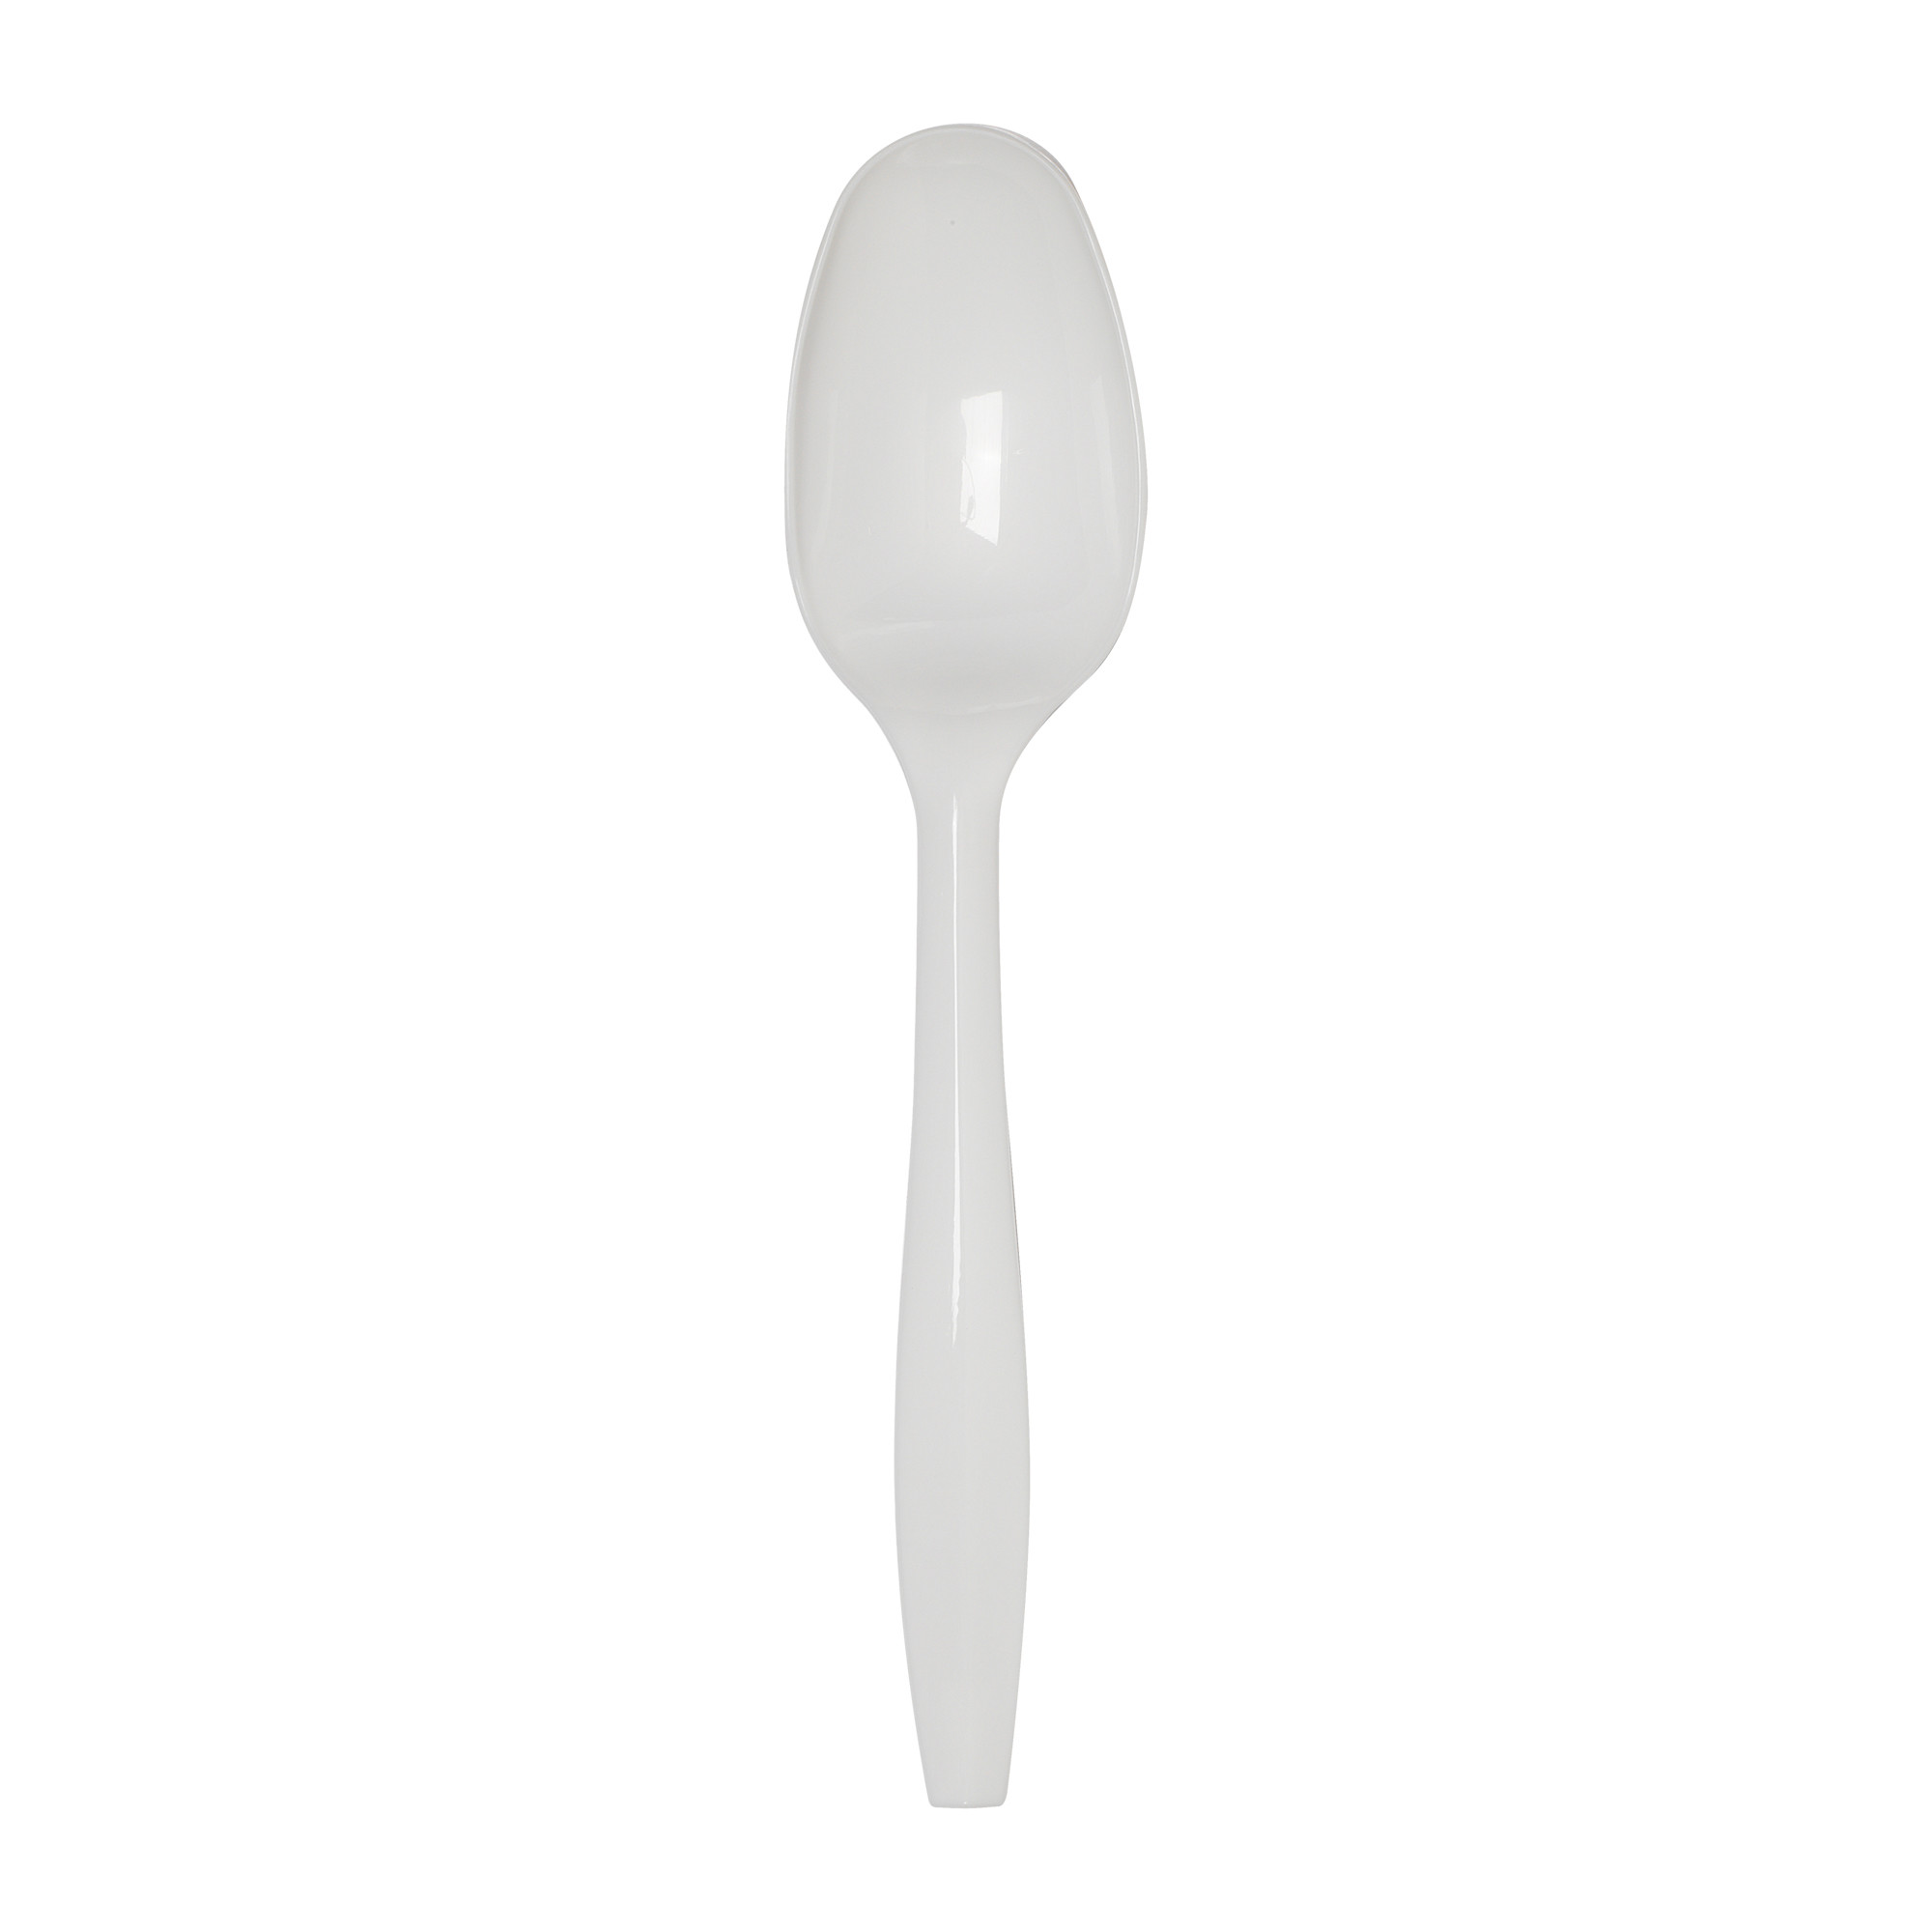 FULL SIZE WHITE COMPOSTABLE SPOON 1,000/CASE